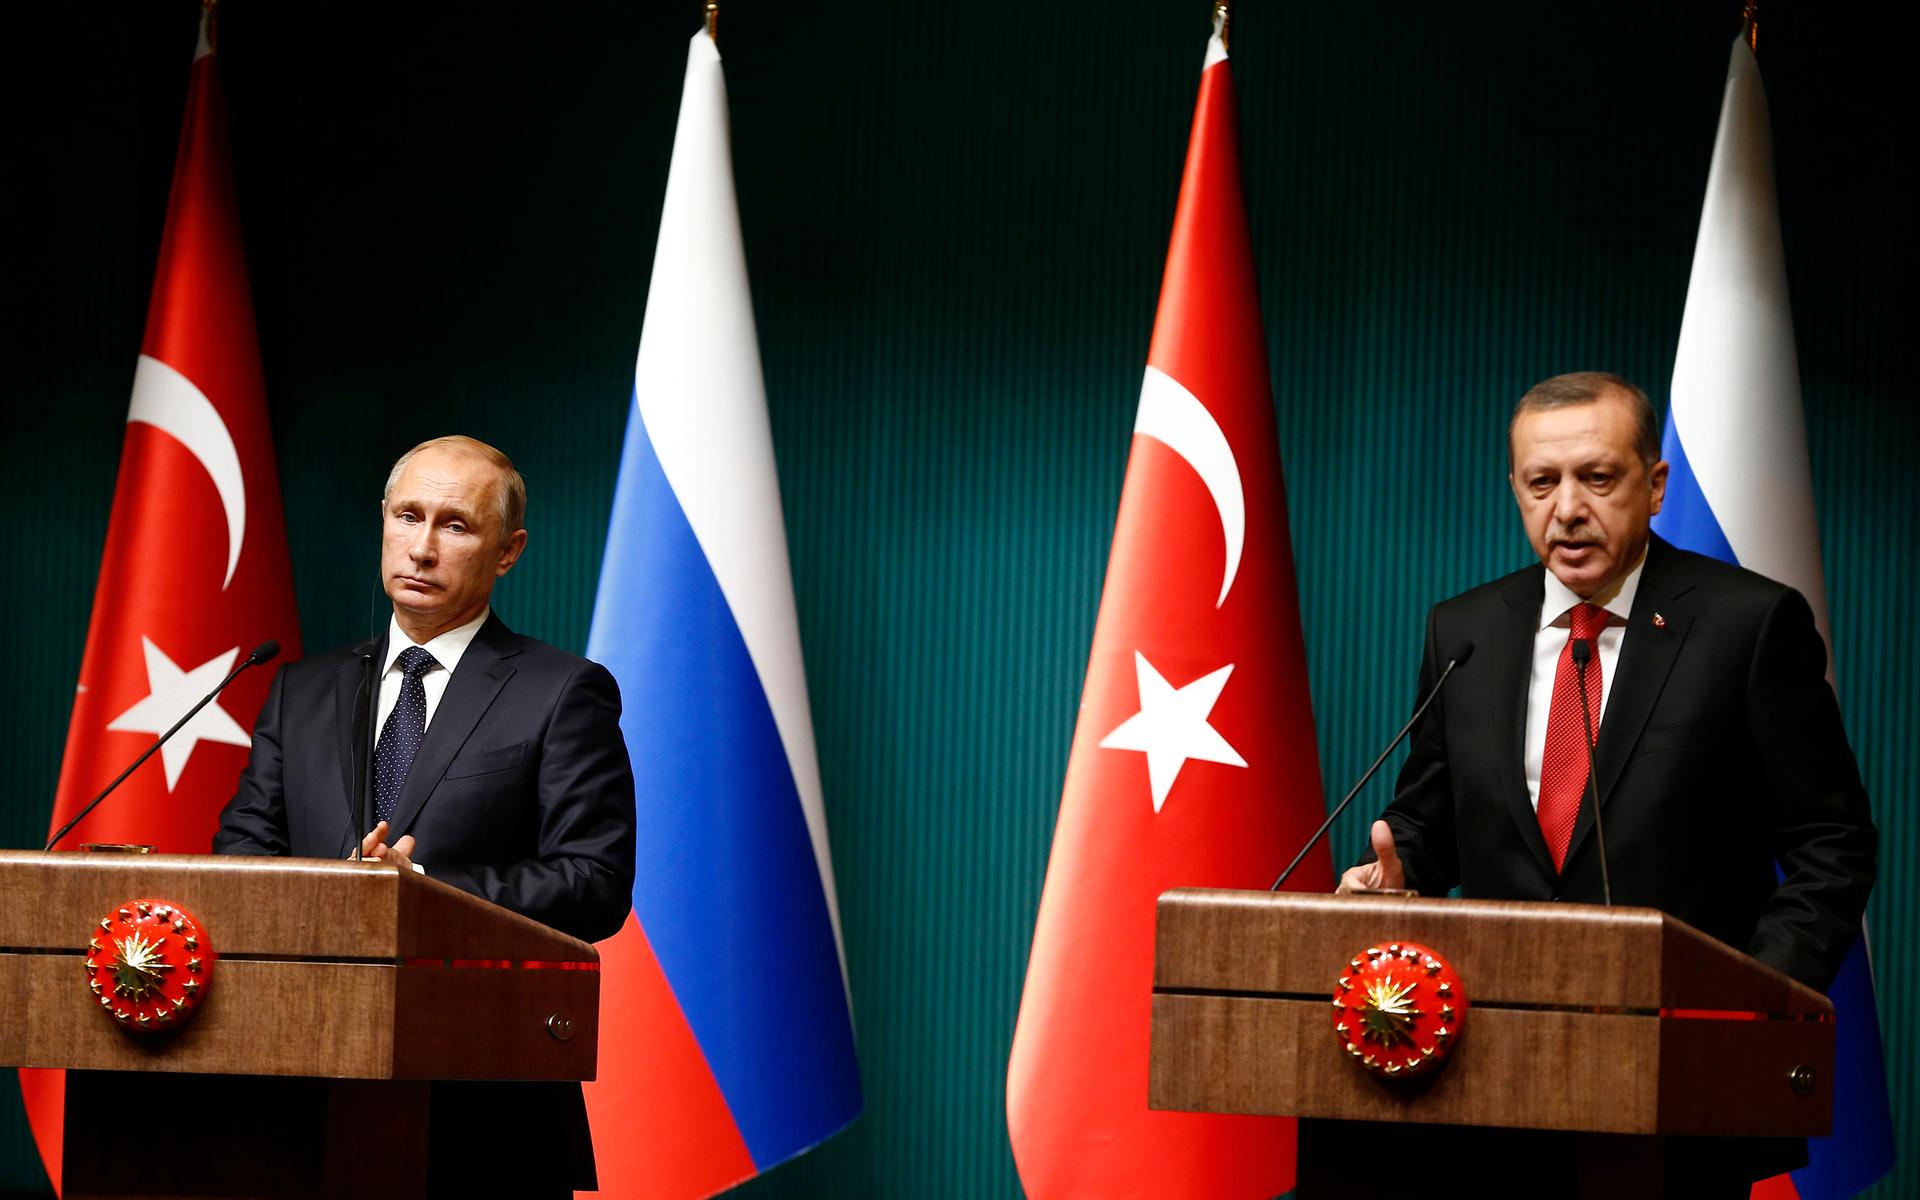 Russian President Vladimir Putin shakes hands with Turkey's President Tayyip Erdogan after a news conference at the Presidential Palace in Ankara December 1, 2014.